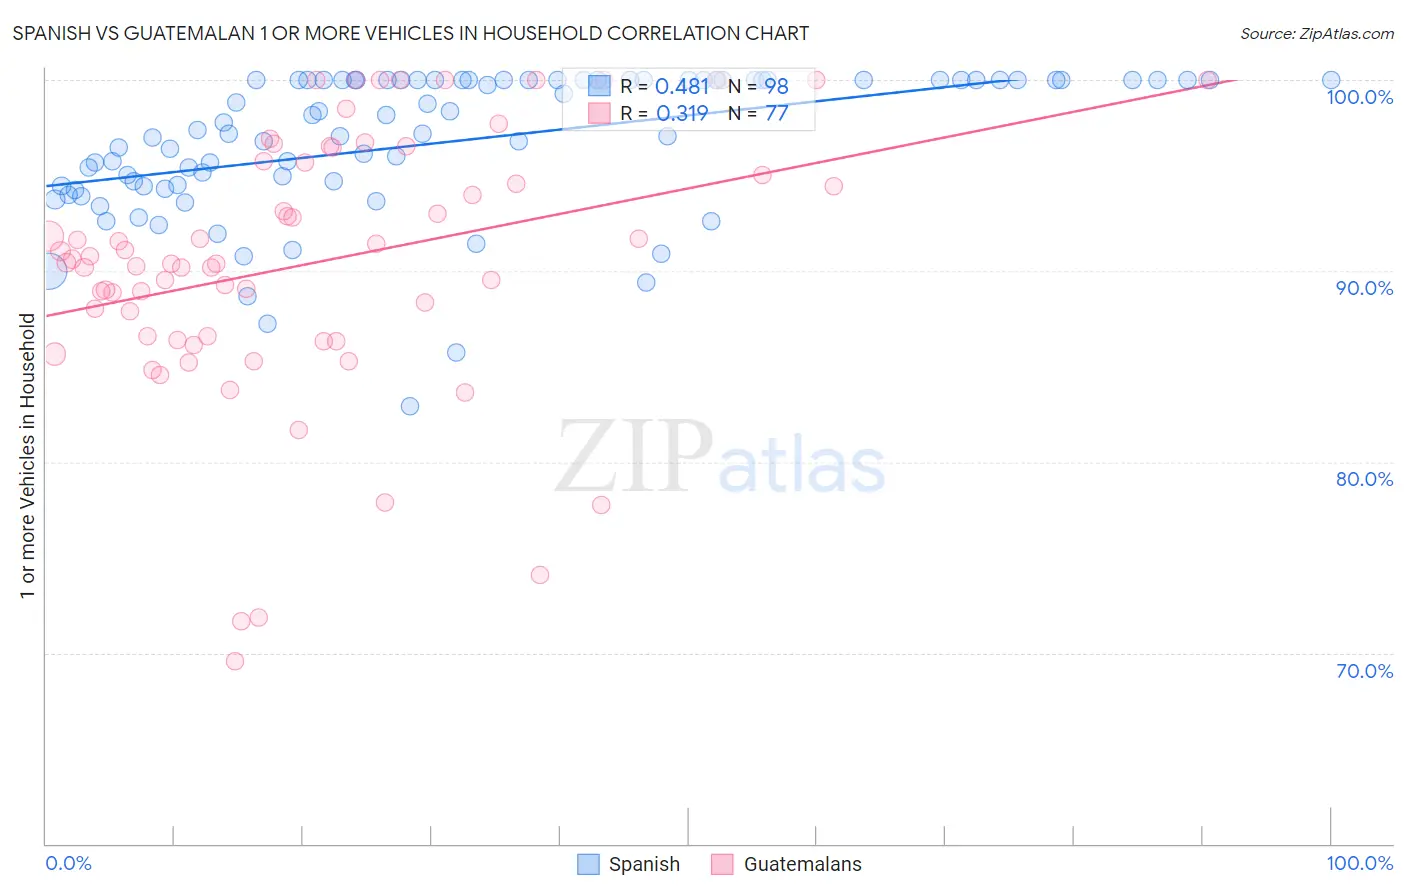 Spanish vs Guatemalan 1 or more Vehicles in Household